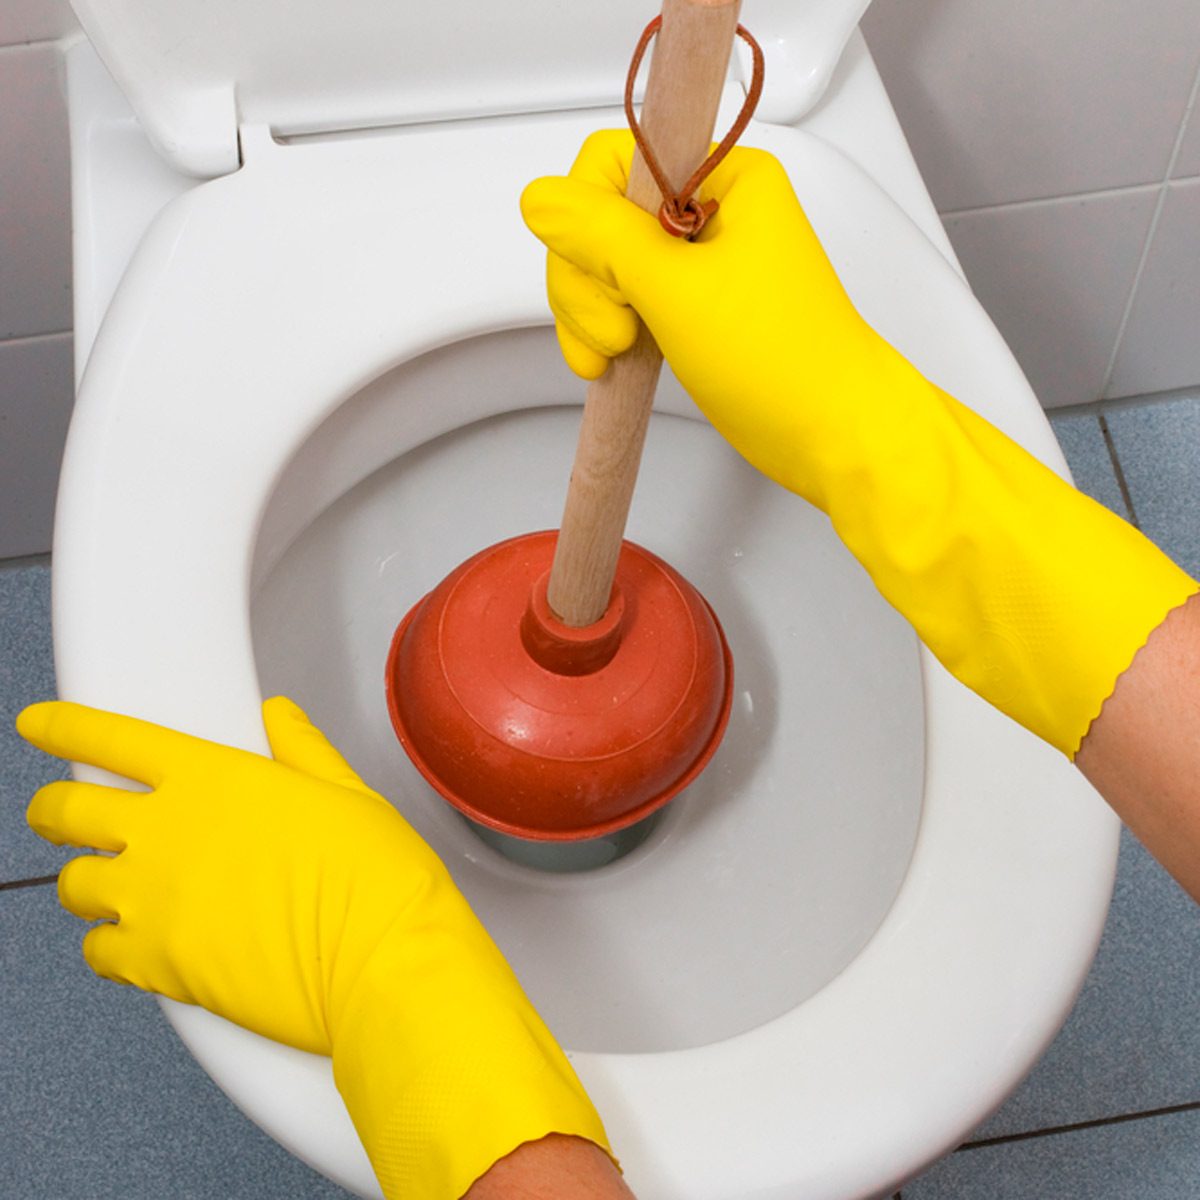 Tips on How to Effectively Use a Plunger